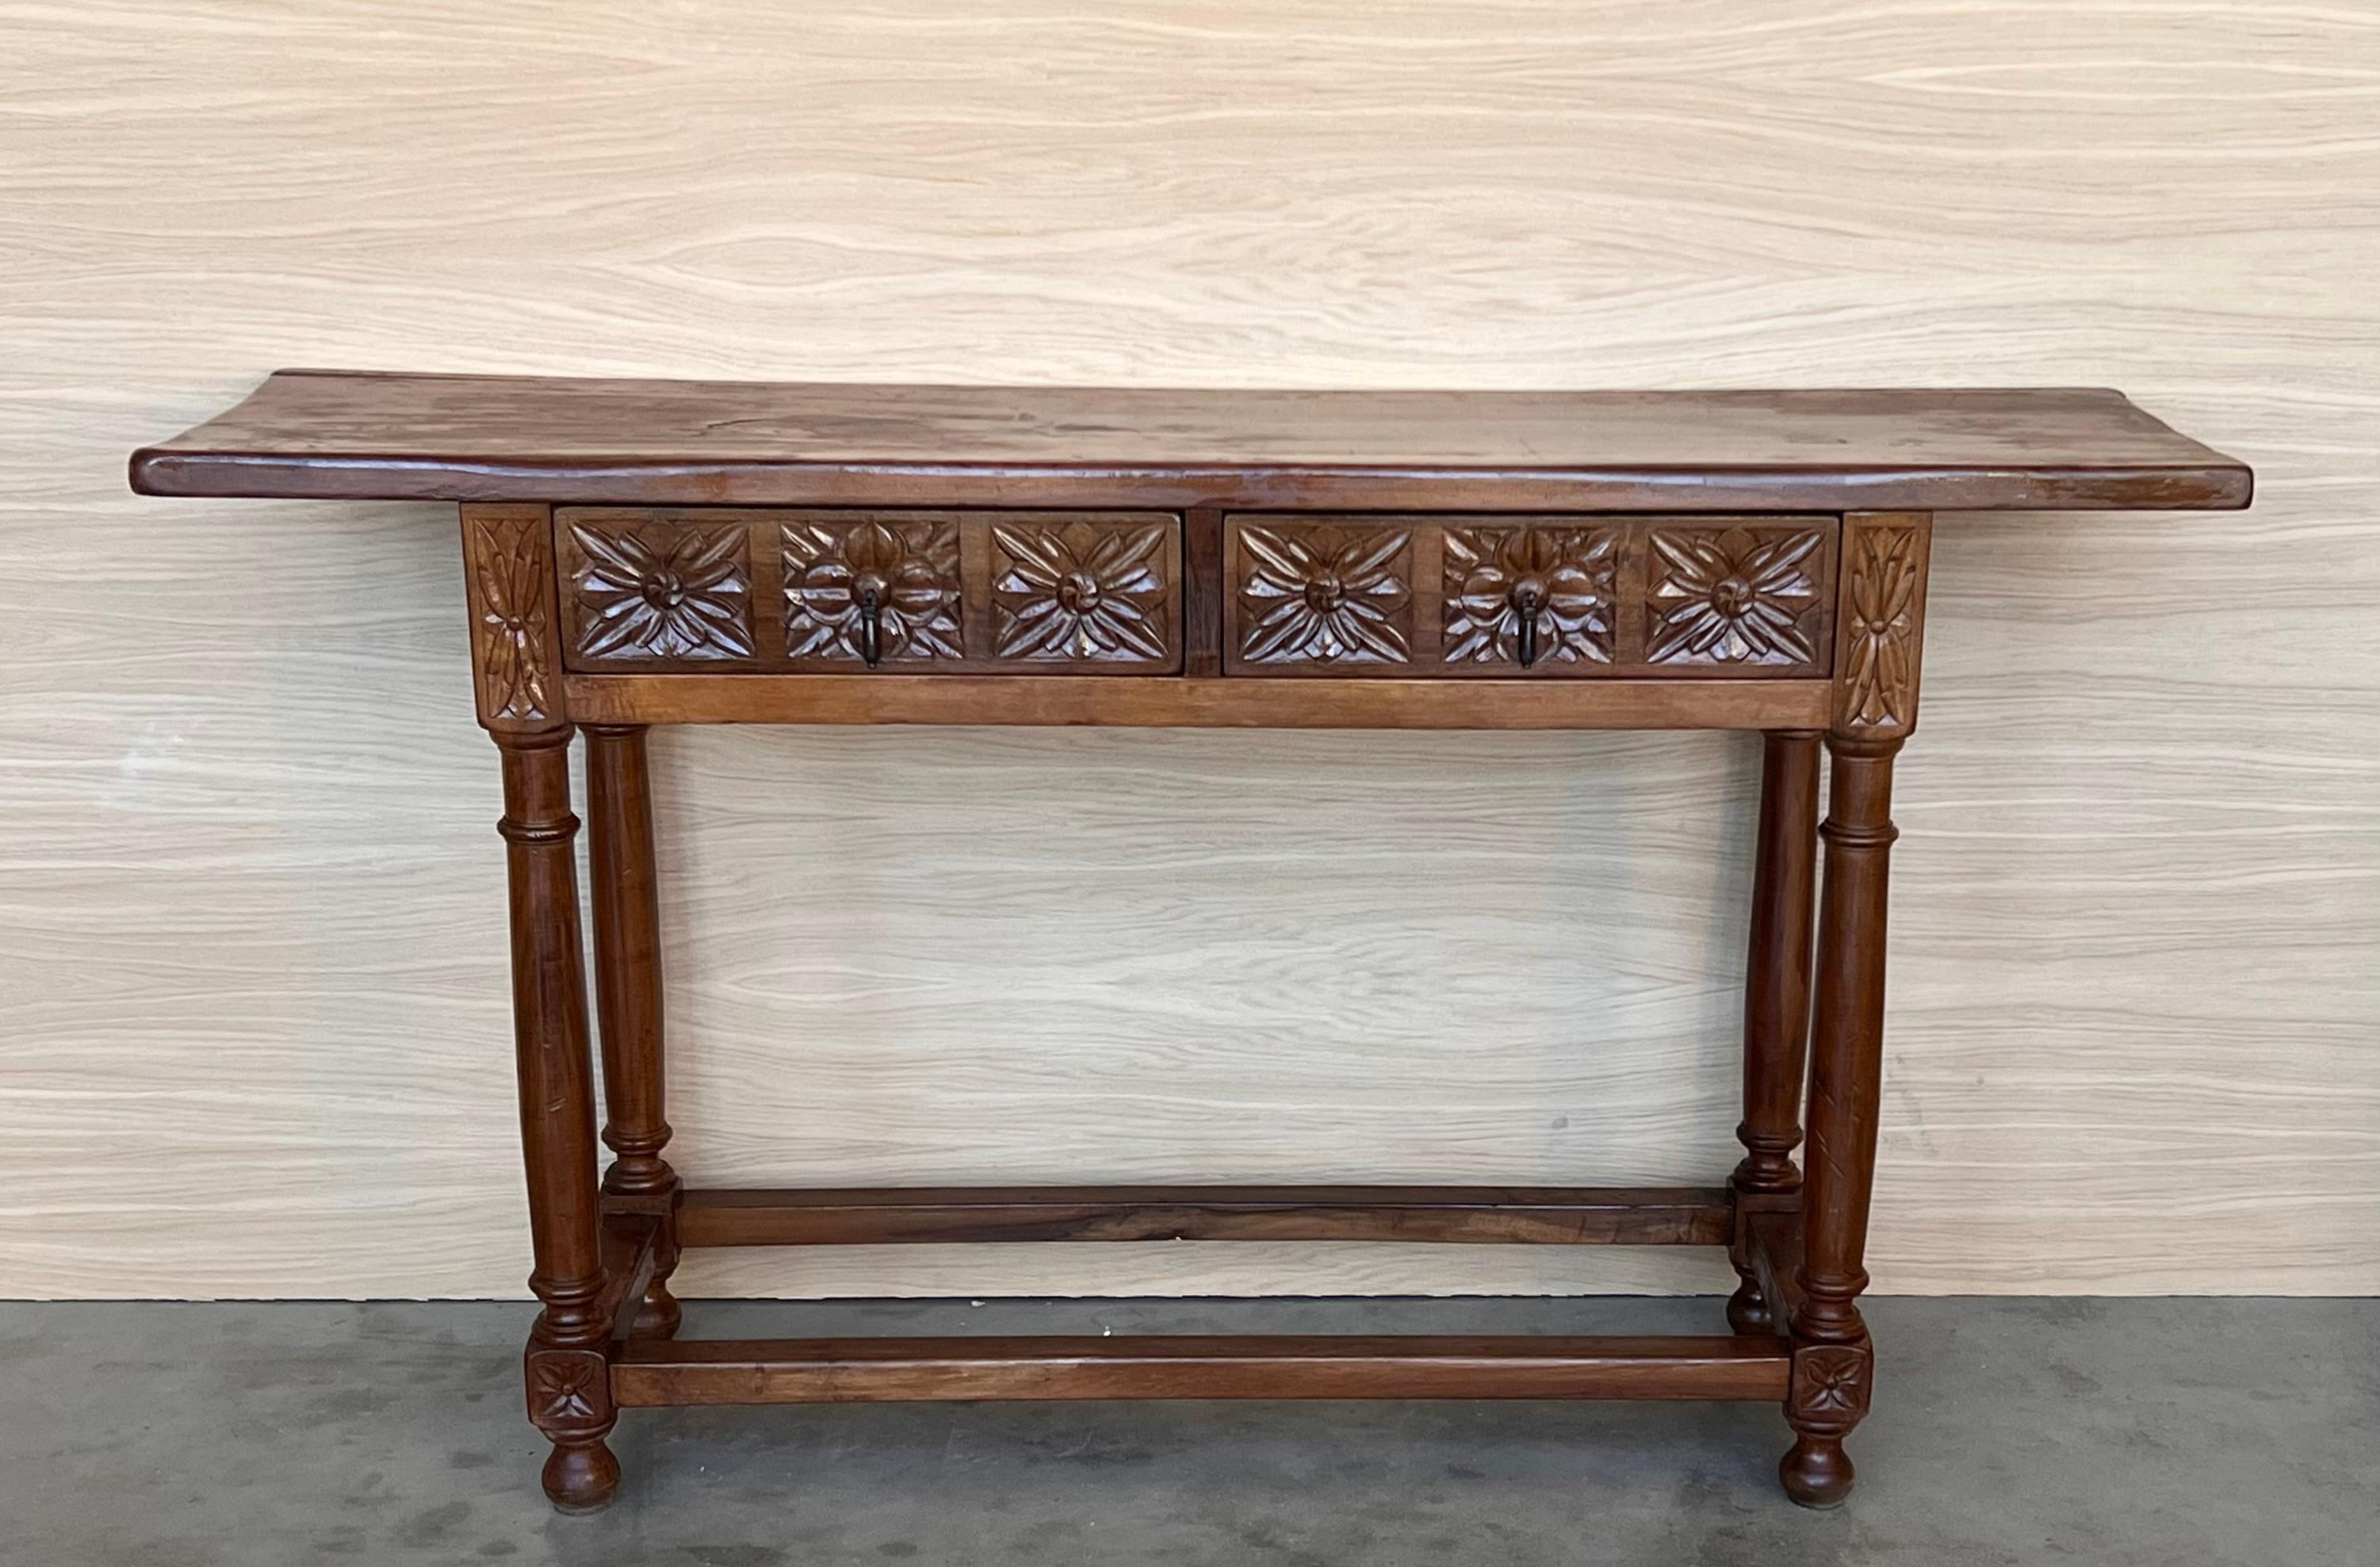 Early 20th Century Spanish Colonial Walnut Console ~ Sofa Table is a splendid reminder of a bygone era! Hand-crafted from old growth walnut, it features a single thick plank of solid walnut serving as the top surface. A casework that contains two